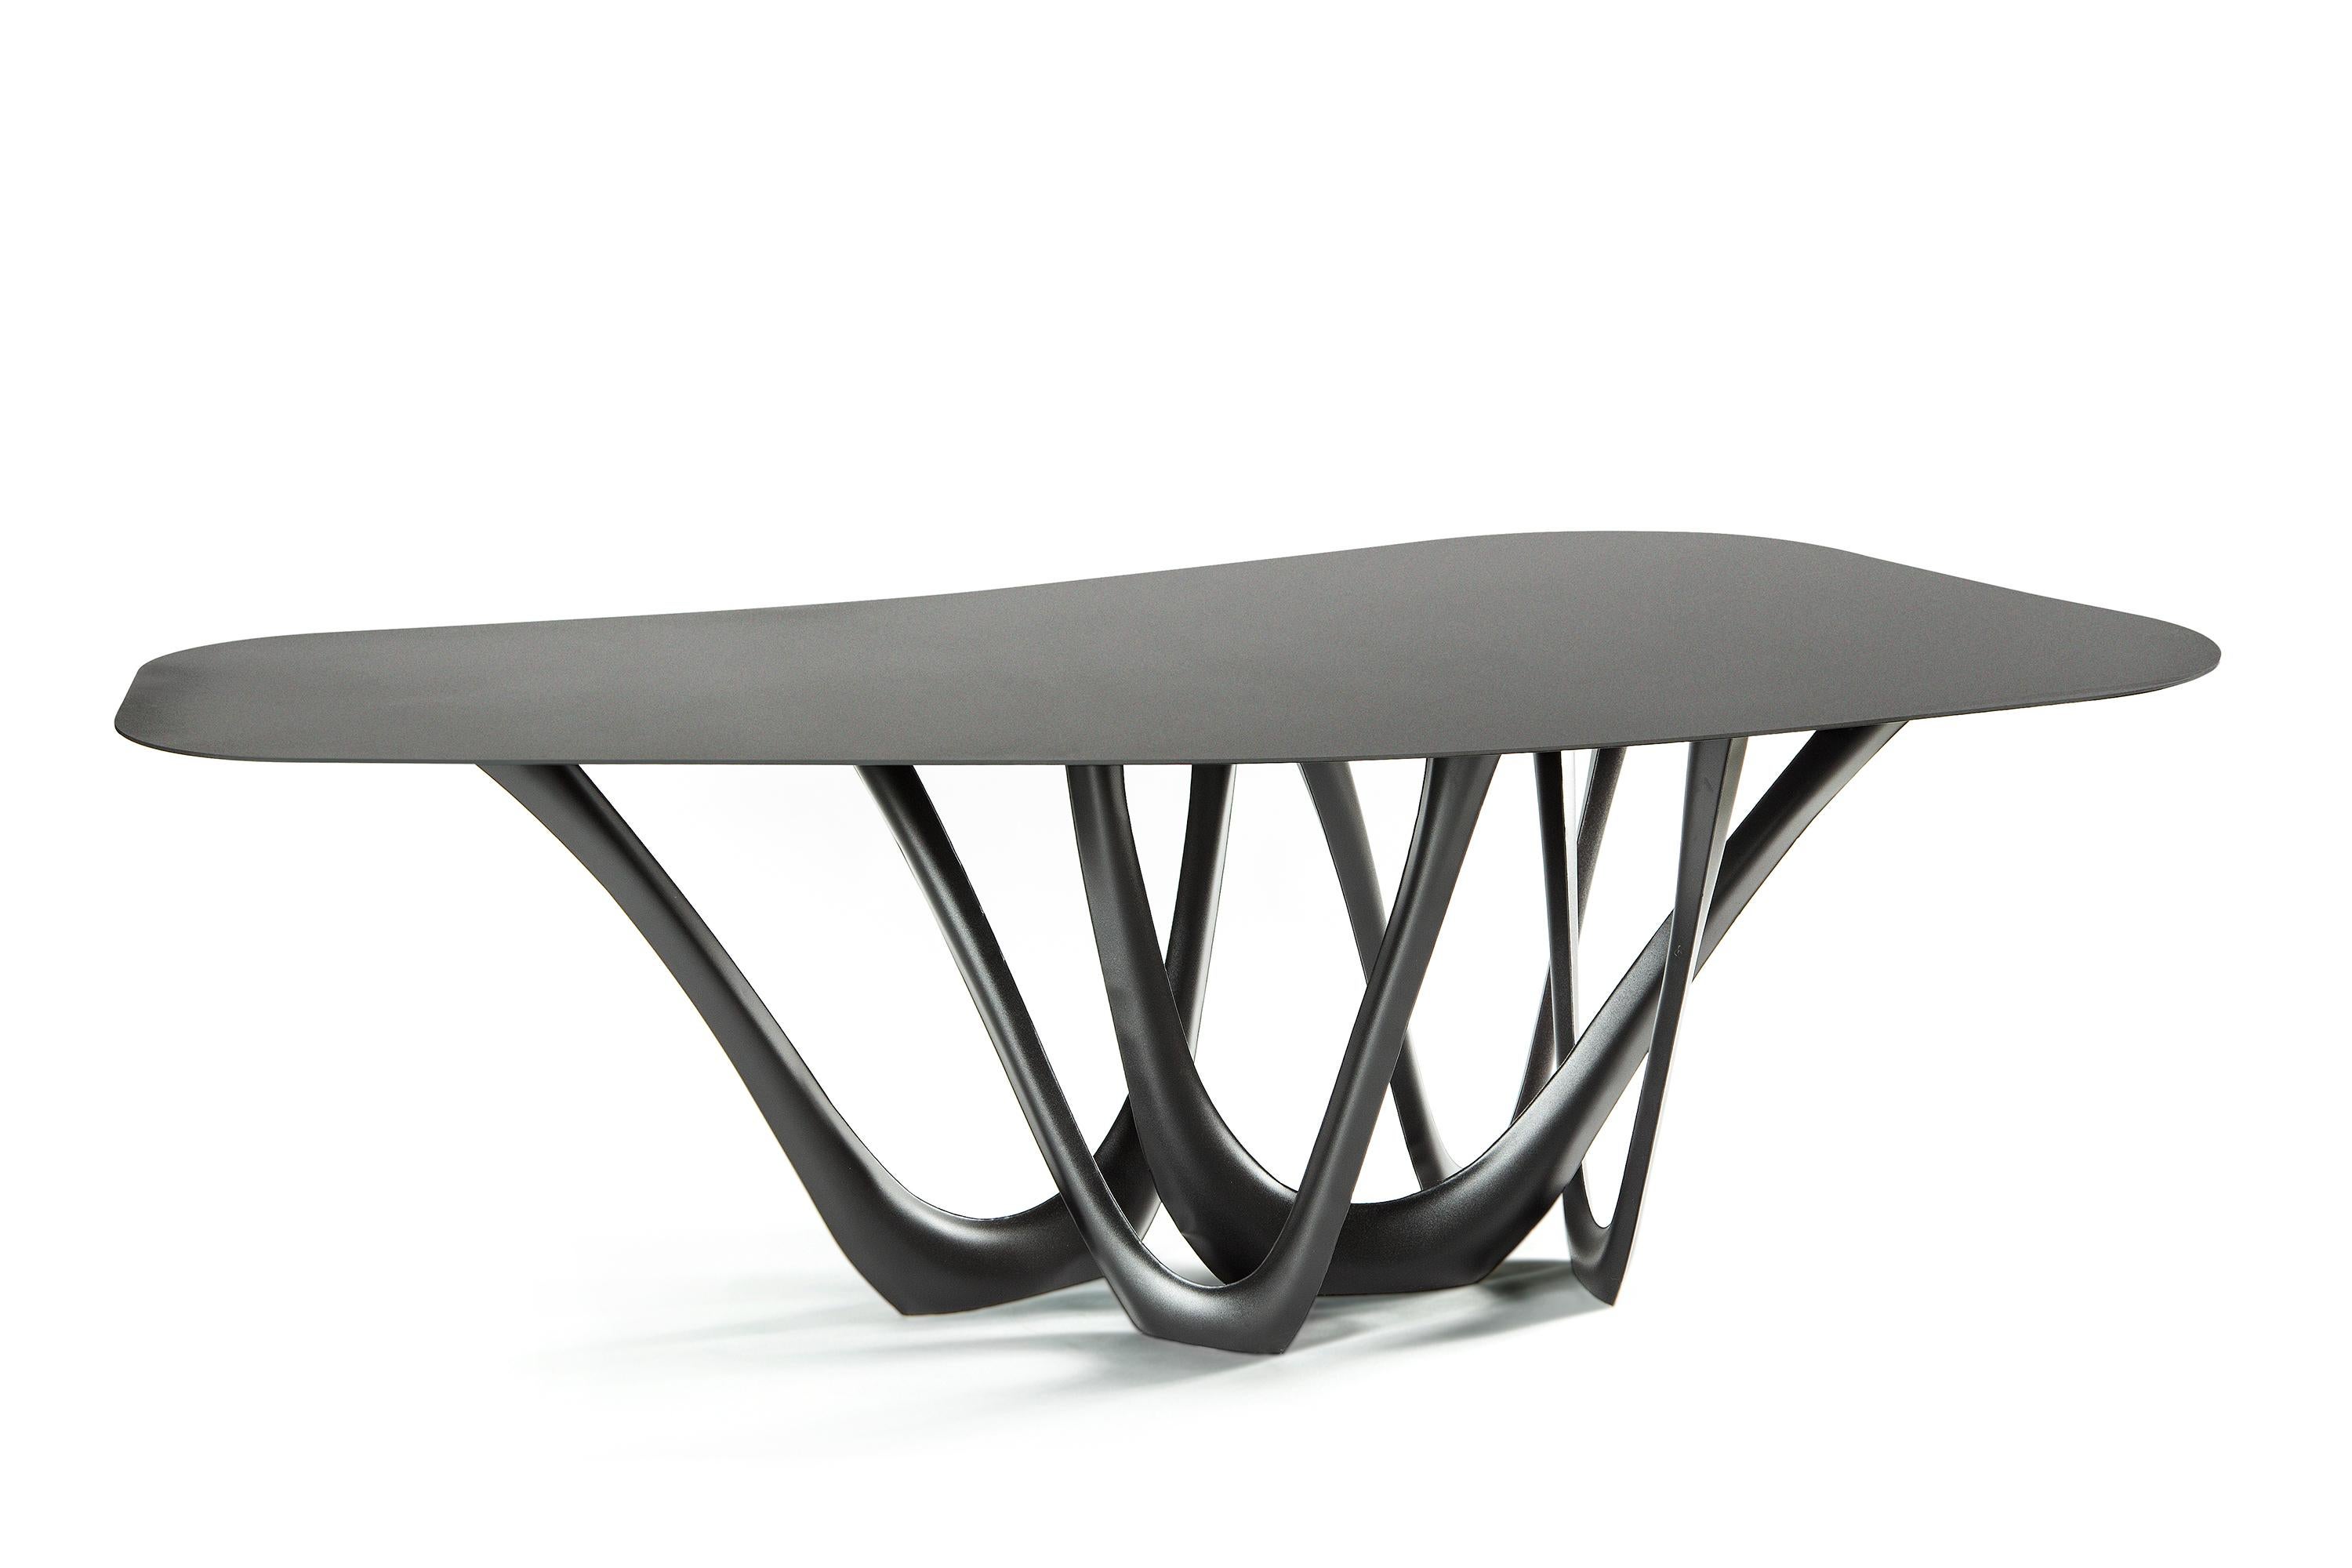 Powder-Coated White Glossy Steel Sculptural G-Table by Zieta For Sale